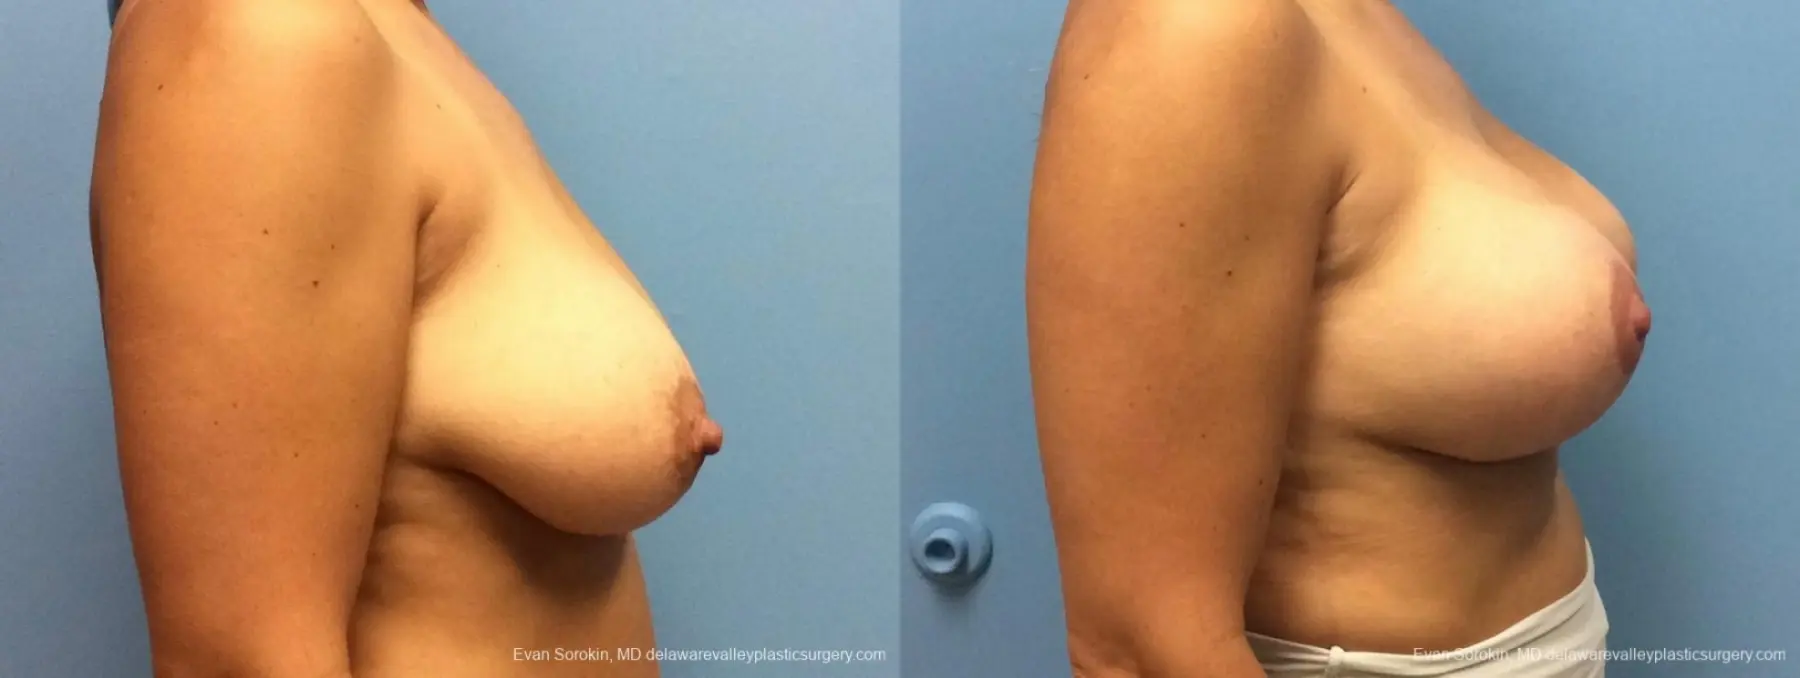 Philadelphia Breast Lift and Augmentation 13070 - Before and After 3